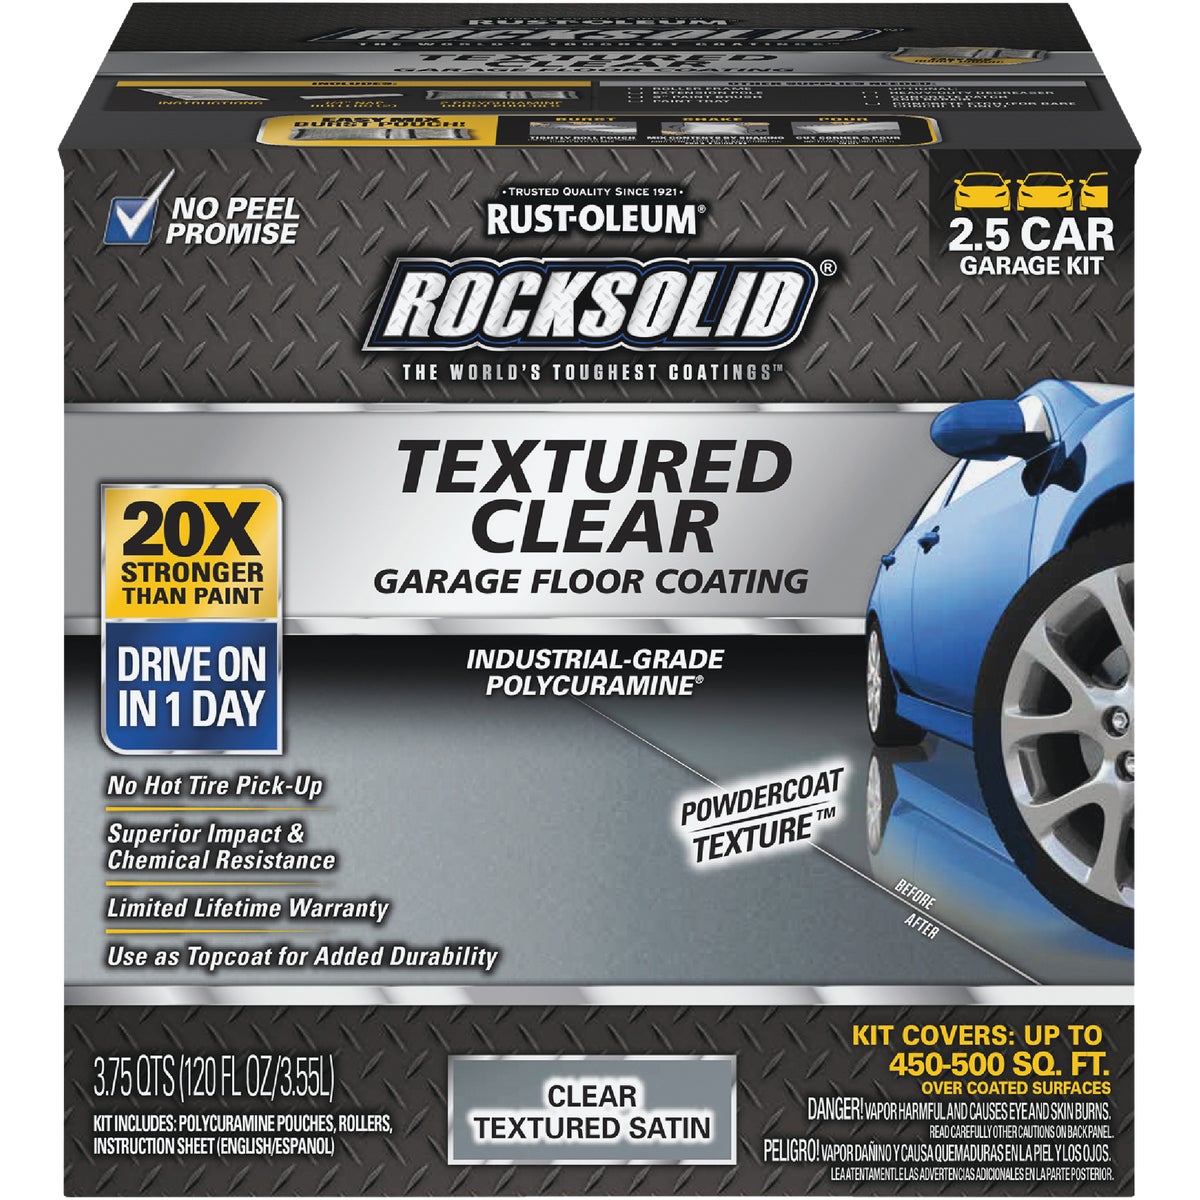 Item 772004, RockSolid Textured Clear Topcoat can be applied over bare concrete or 